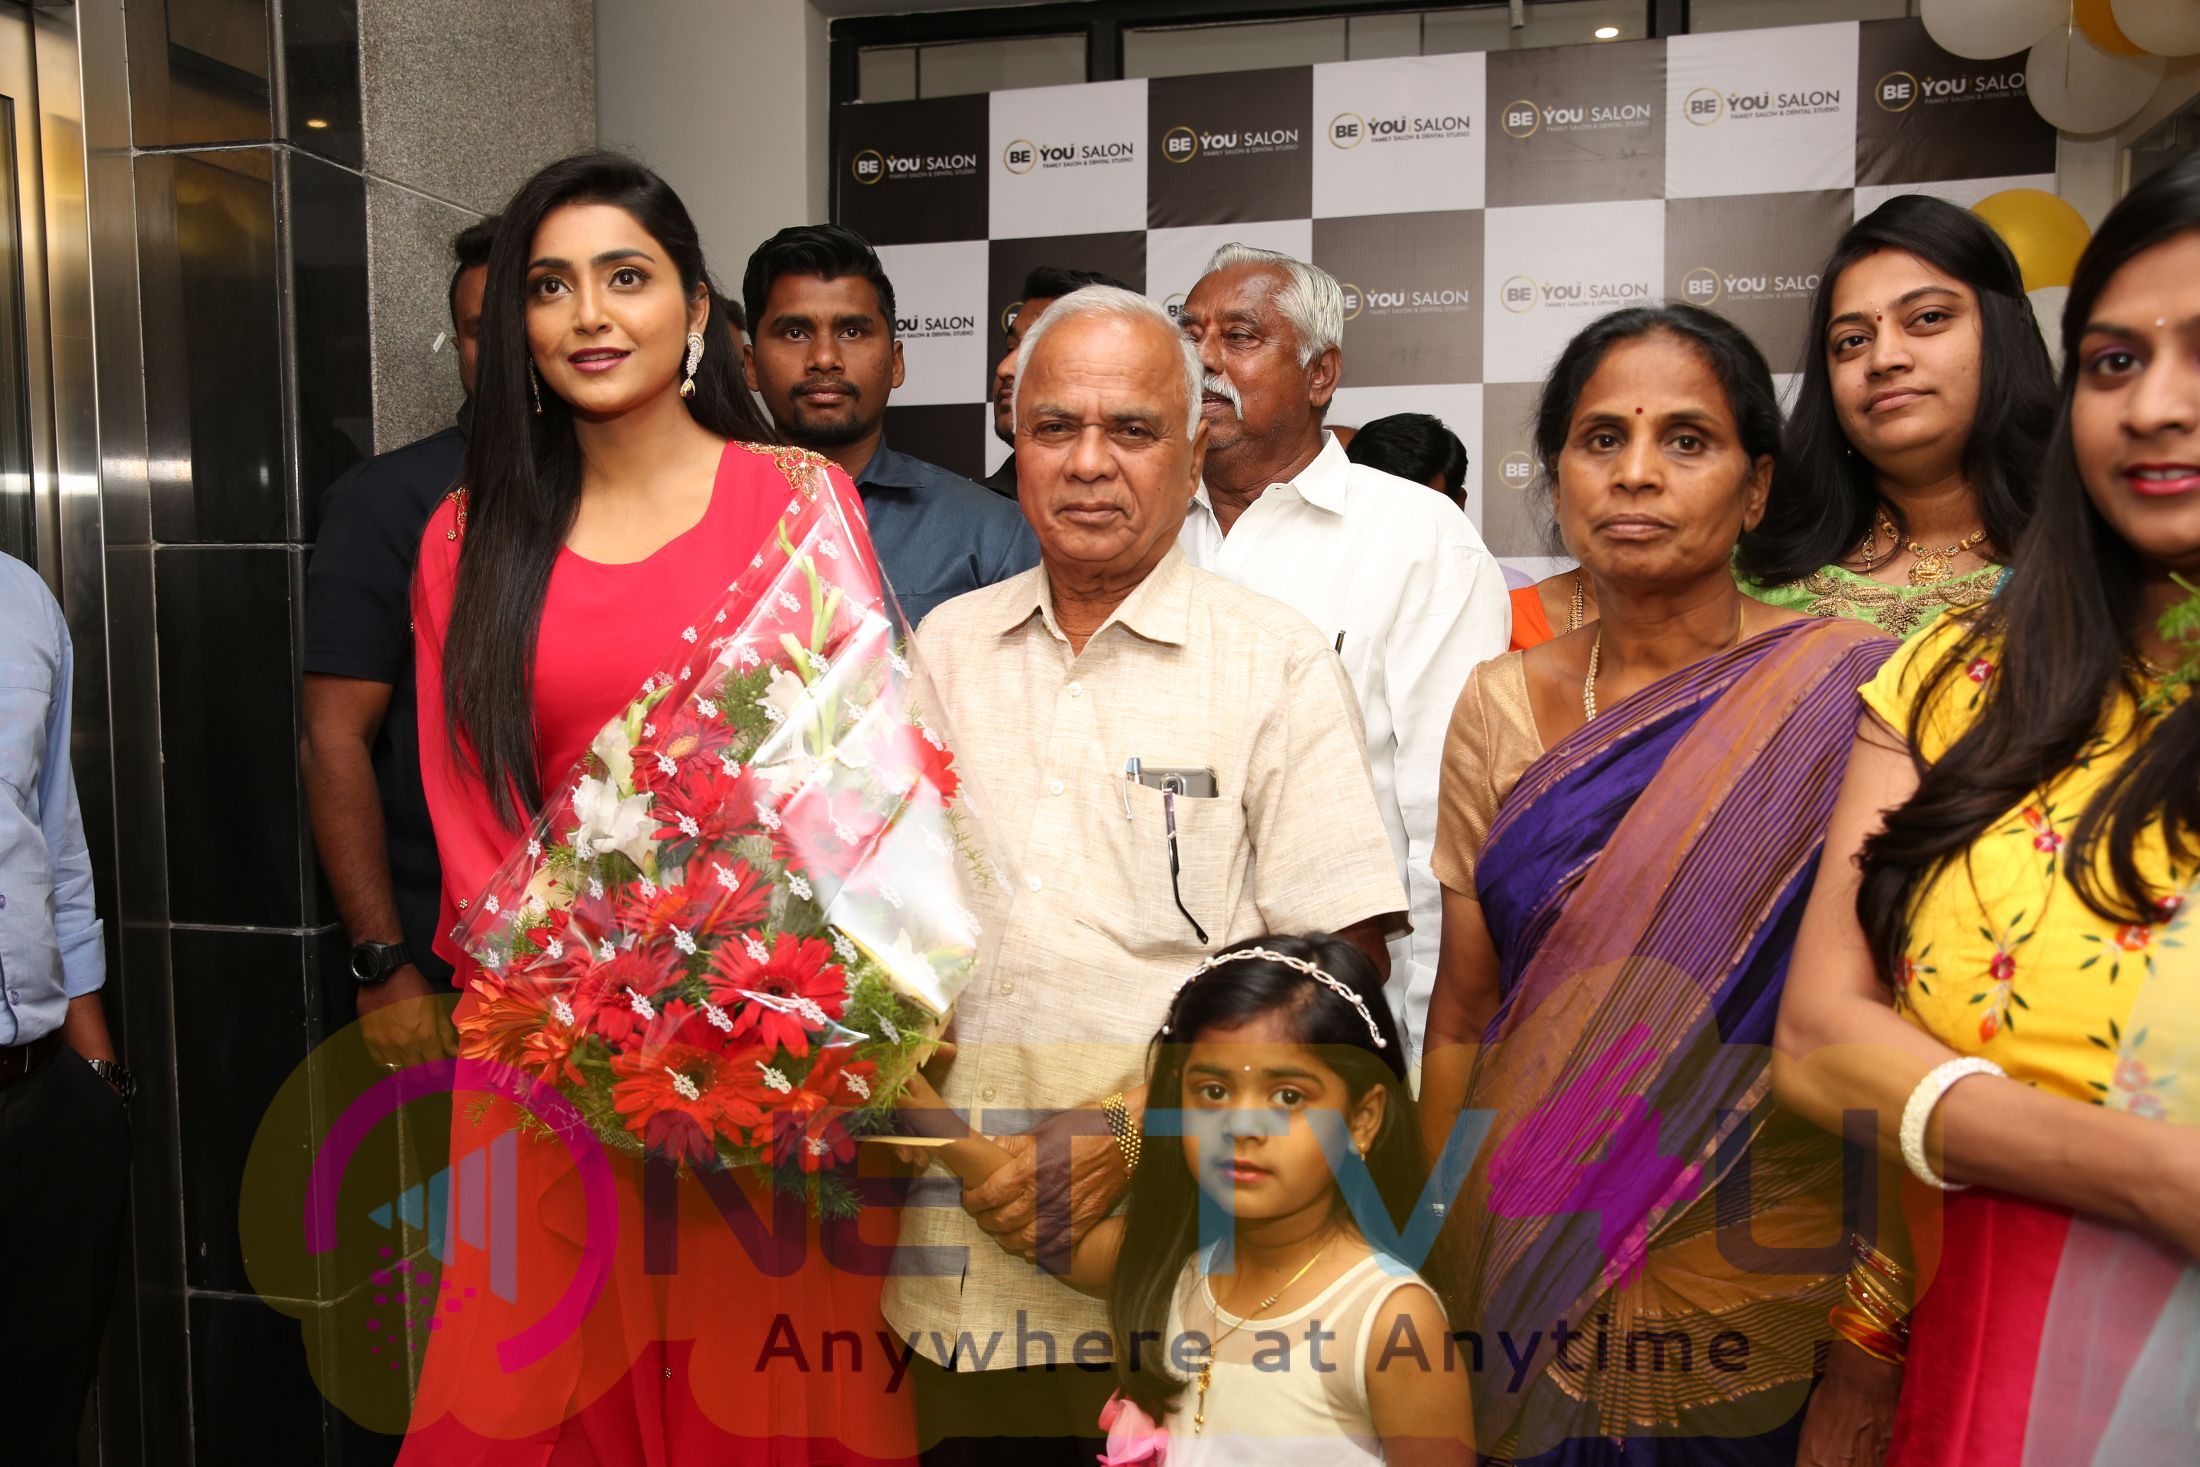 Be You Family Salon And Dental Studio Launched  By Actress Avanthika Mishra  Telugu Gallery